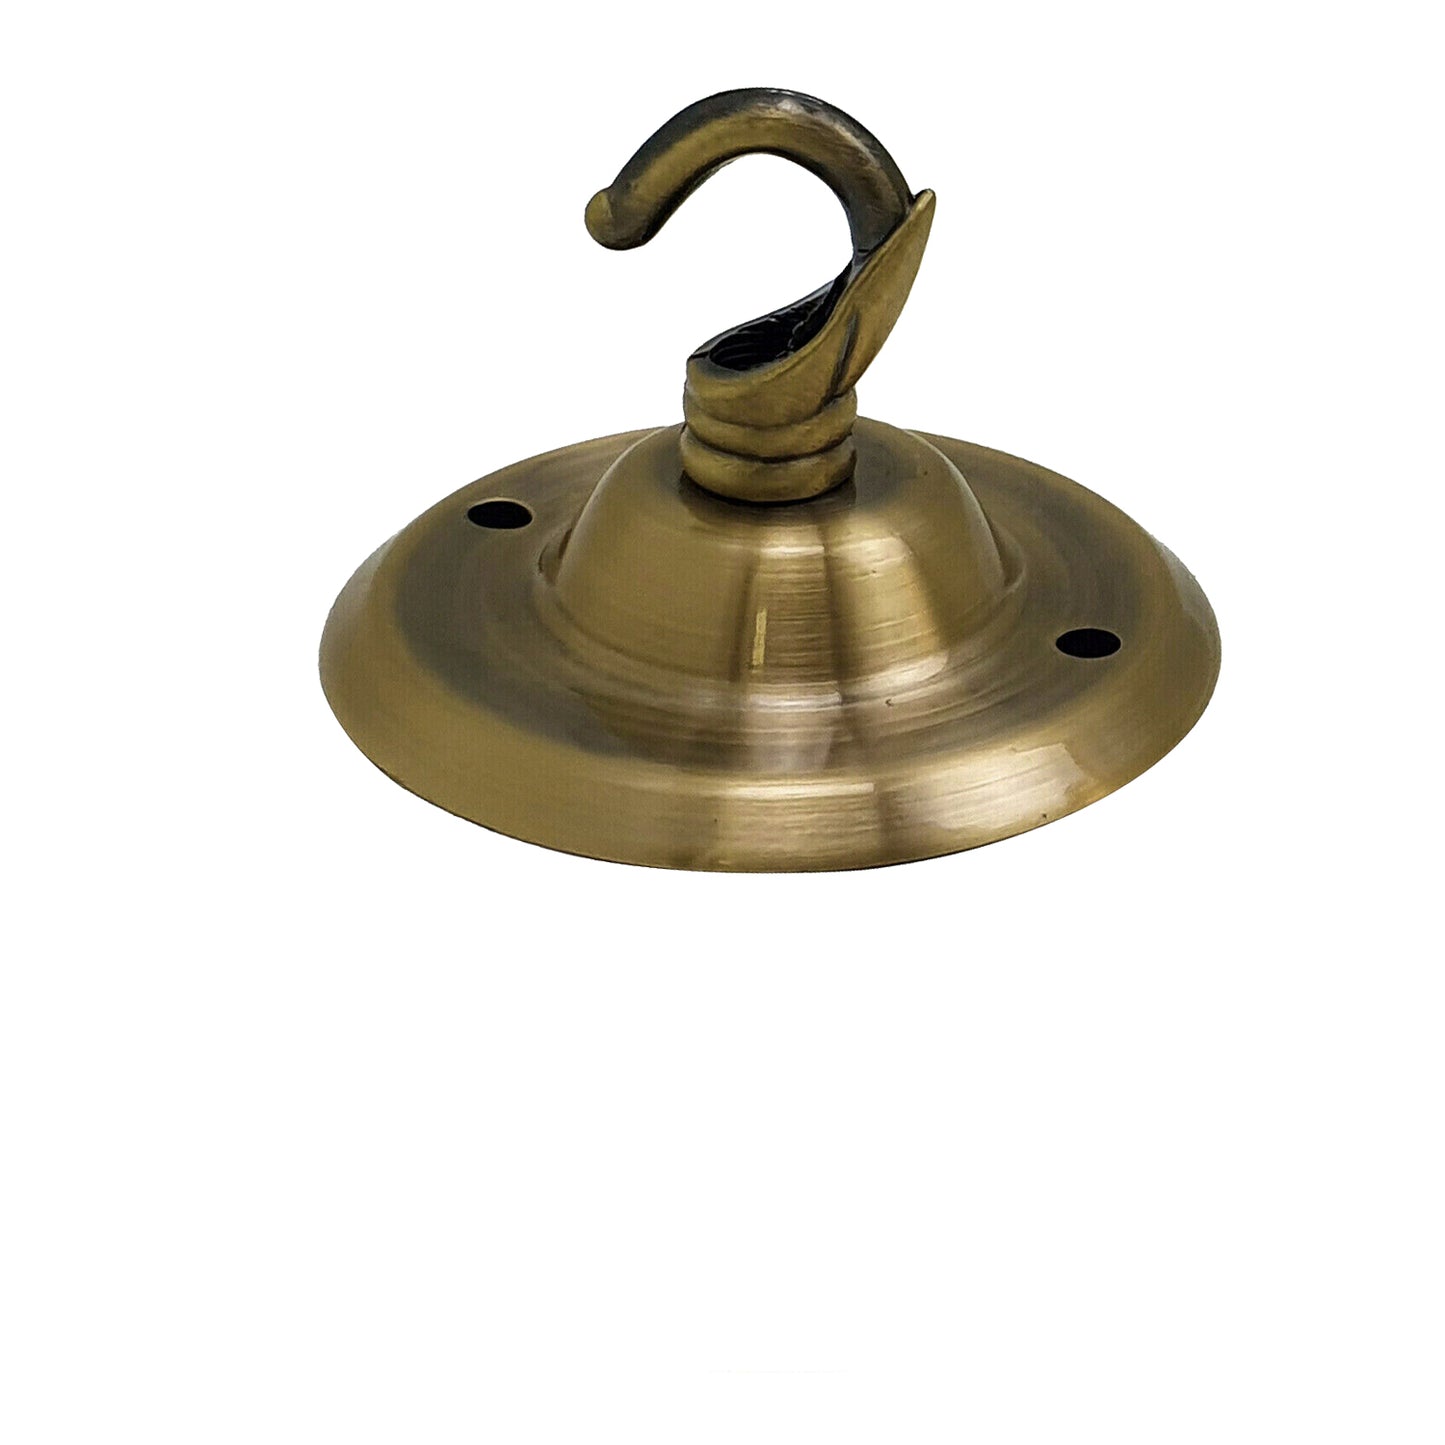 75mm Front Fitting Colour Ceiling Hook With Single Point Drop Outlet Plate ~ 1197